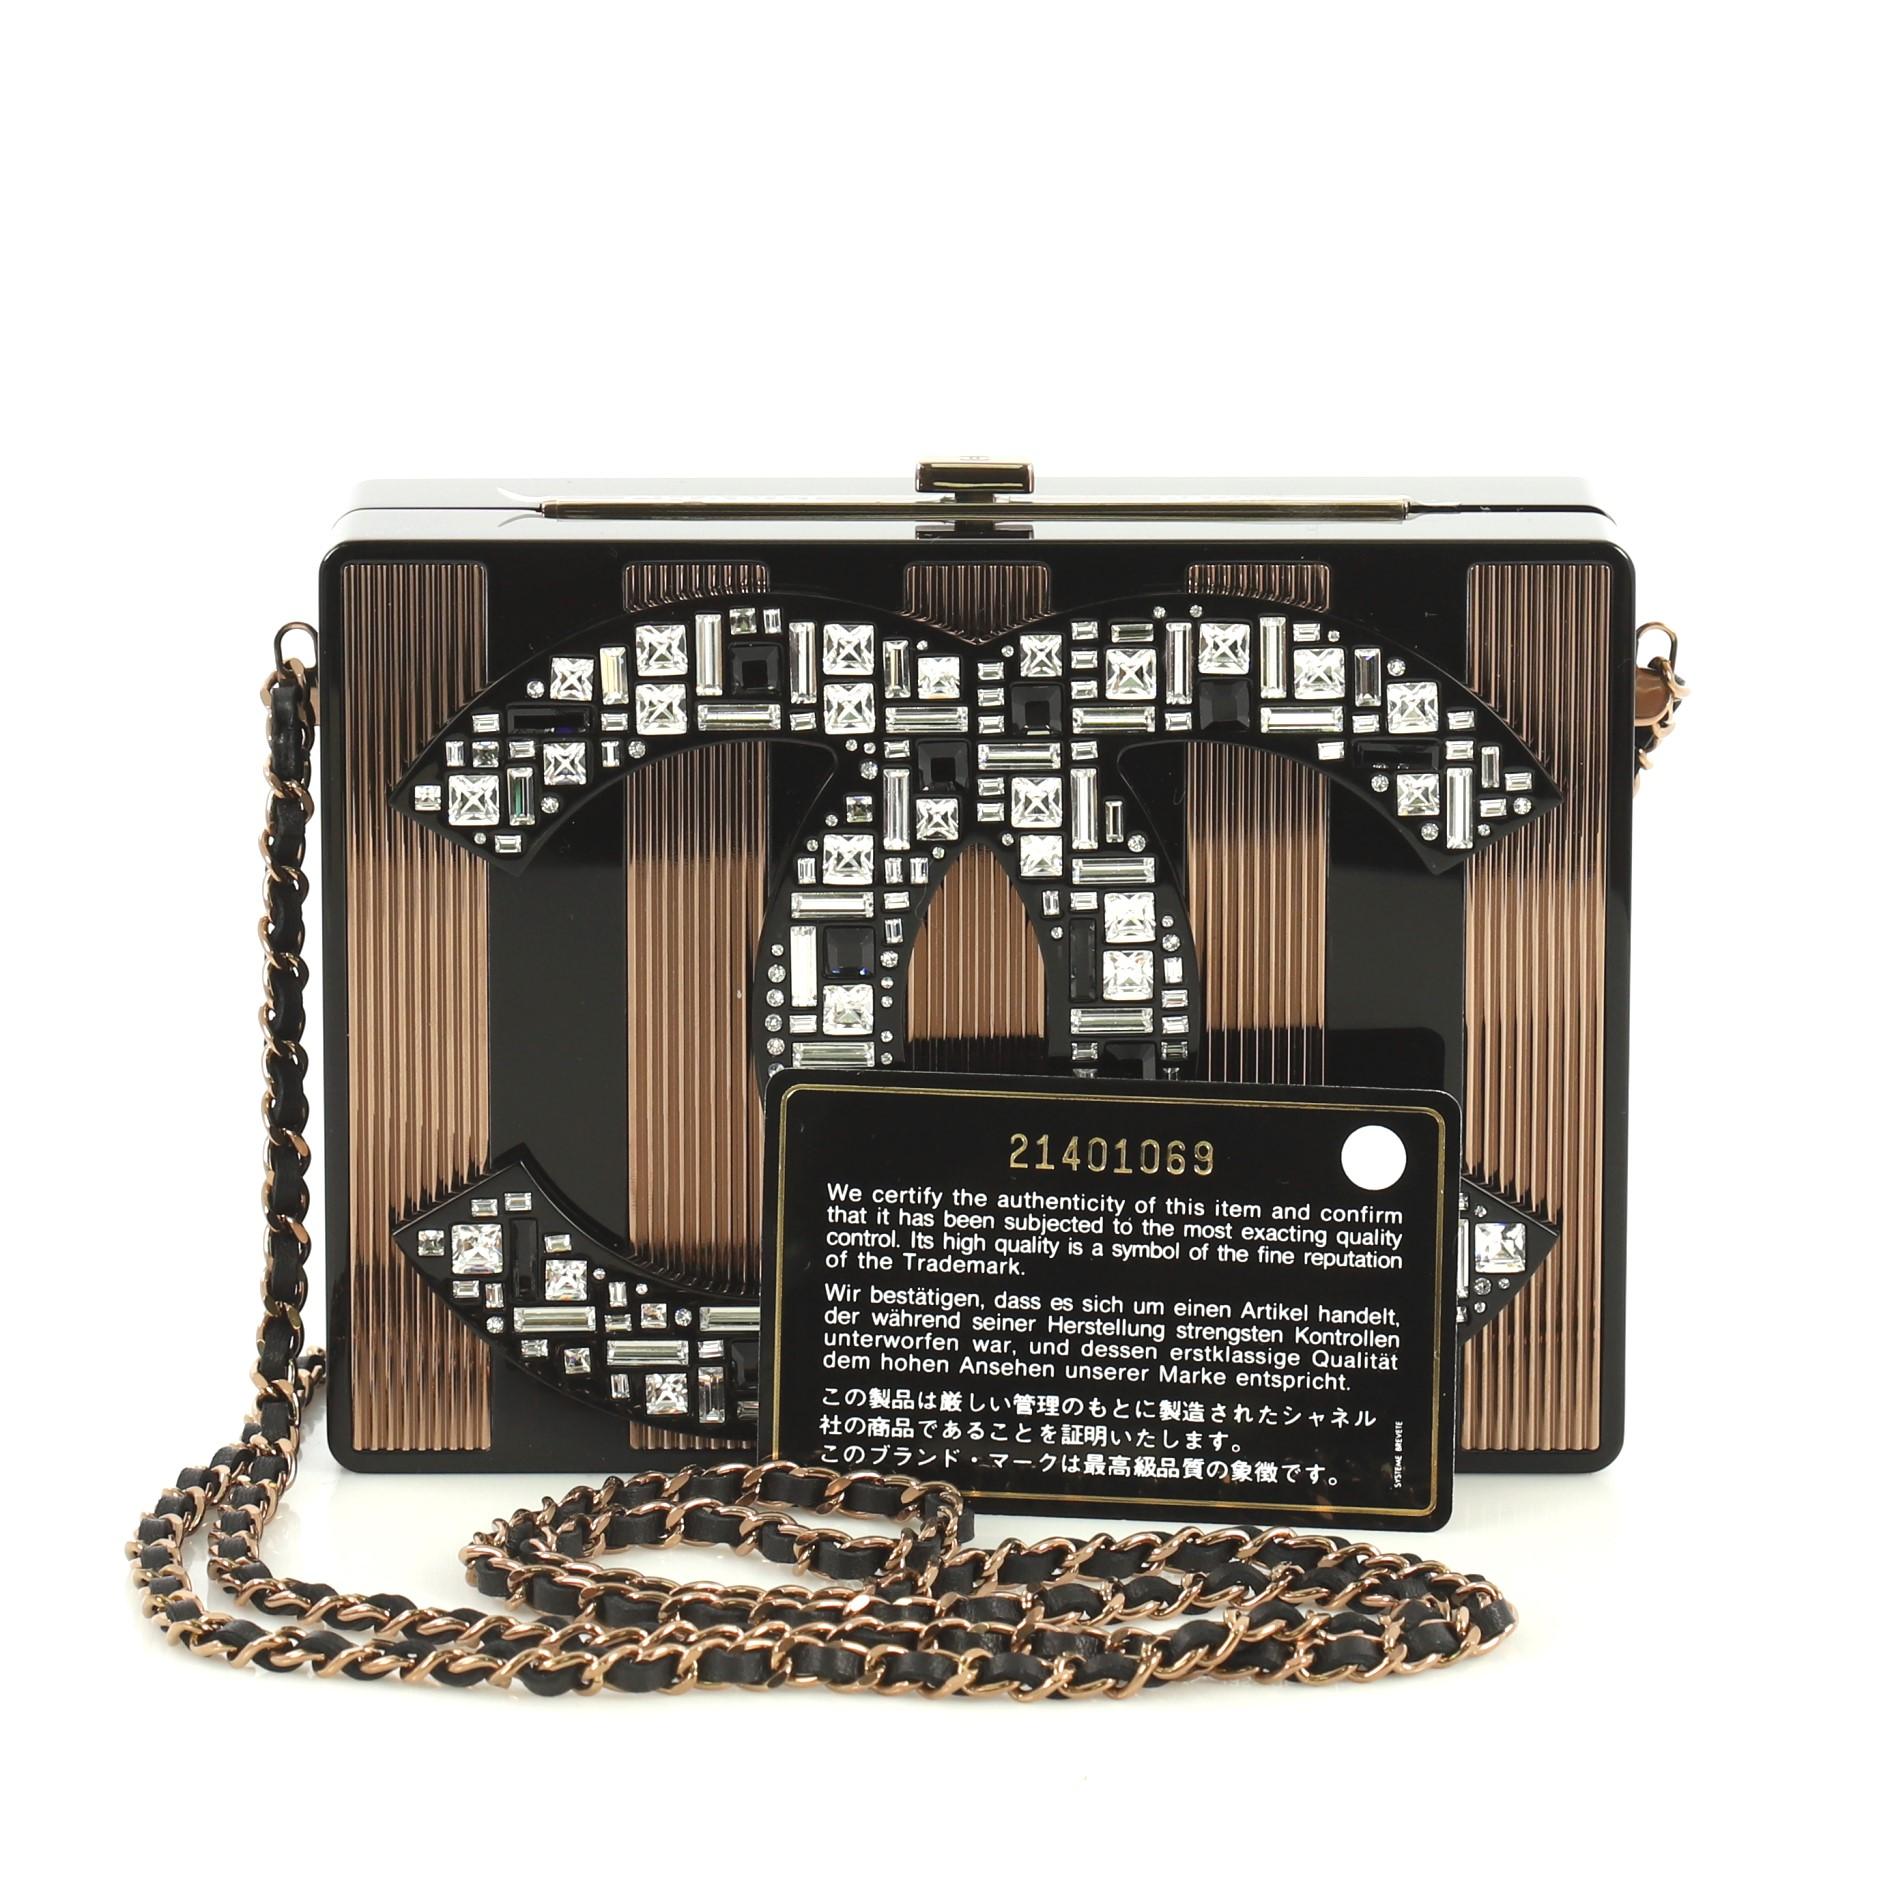 This Chanel CC Minaudiere Clutch Strass Embellished Plexiglass, crafted from black embellished plexiglass, features woven-in leather chain strap, CC logo embellished in strass, and copper-tone hardware. It opens to a black leather interior. Hologram